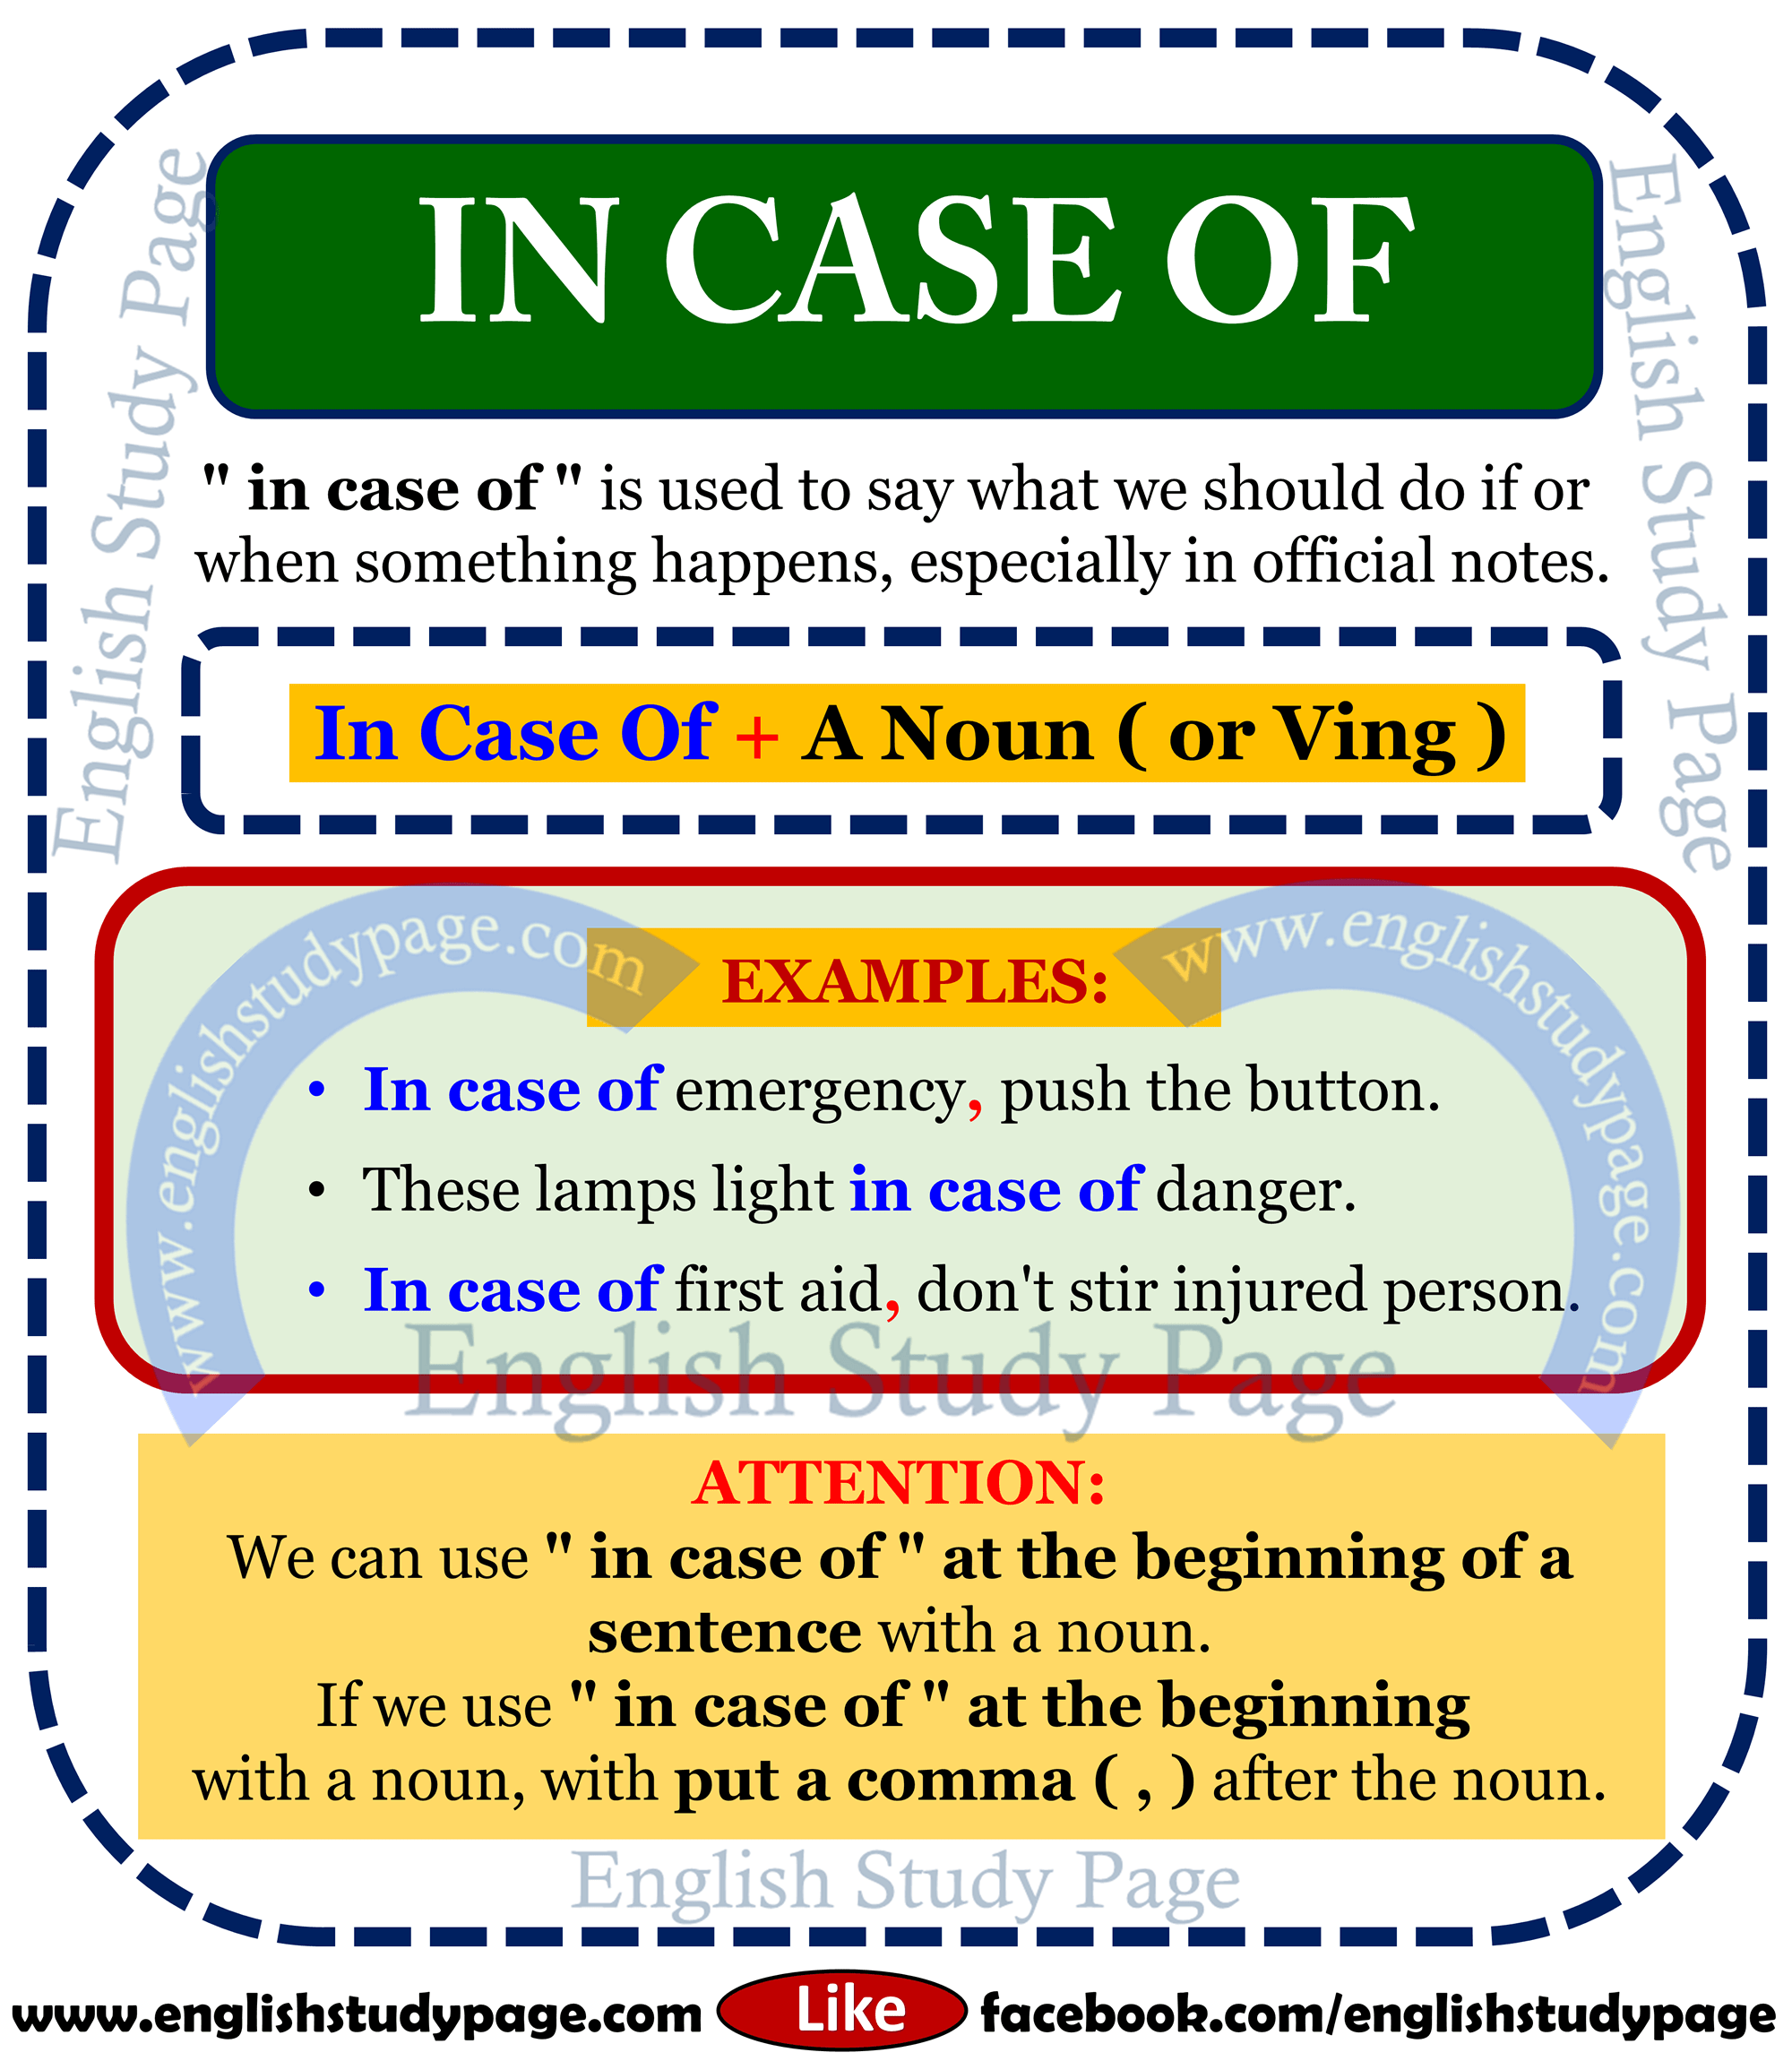 Using “in case of” in English